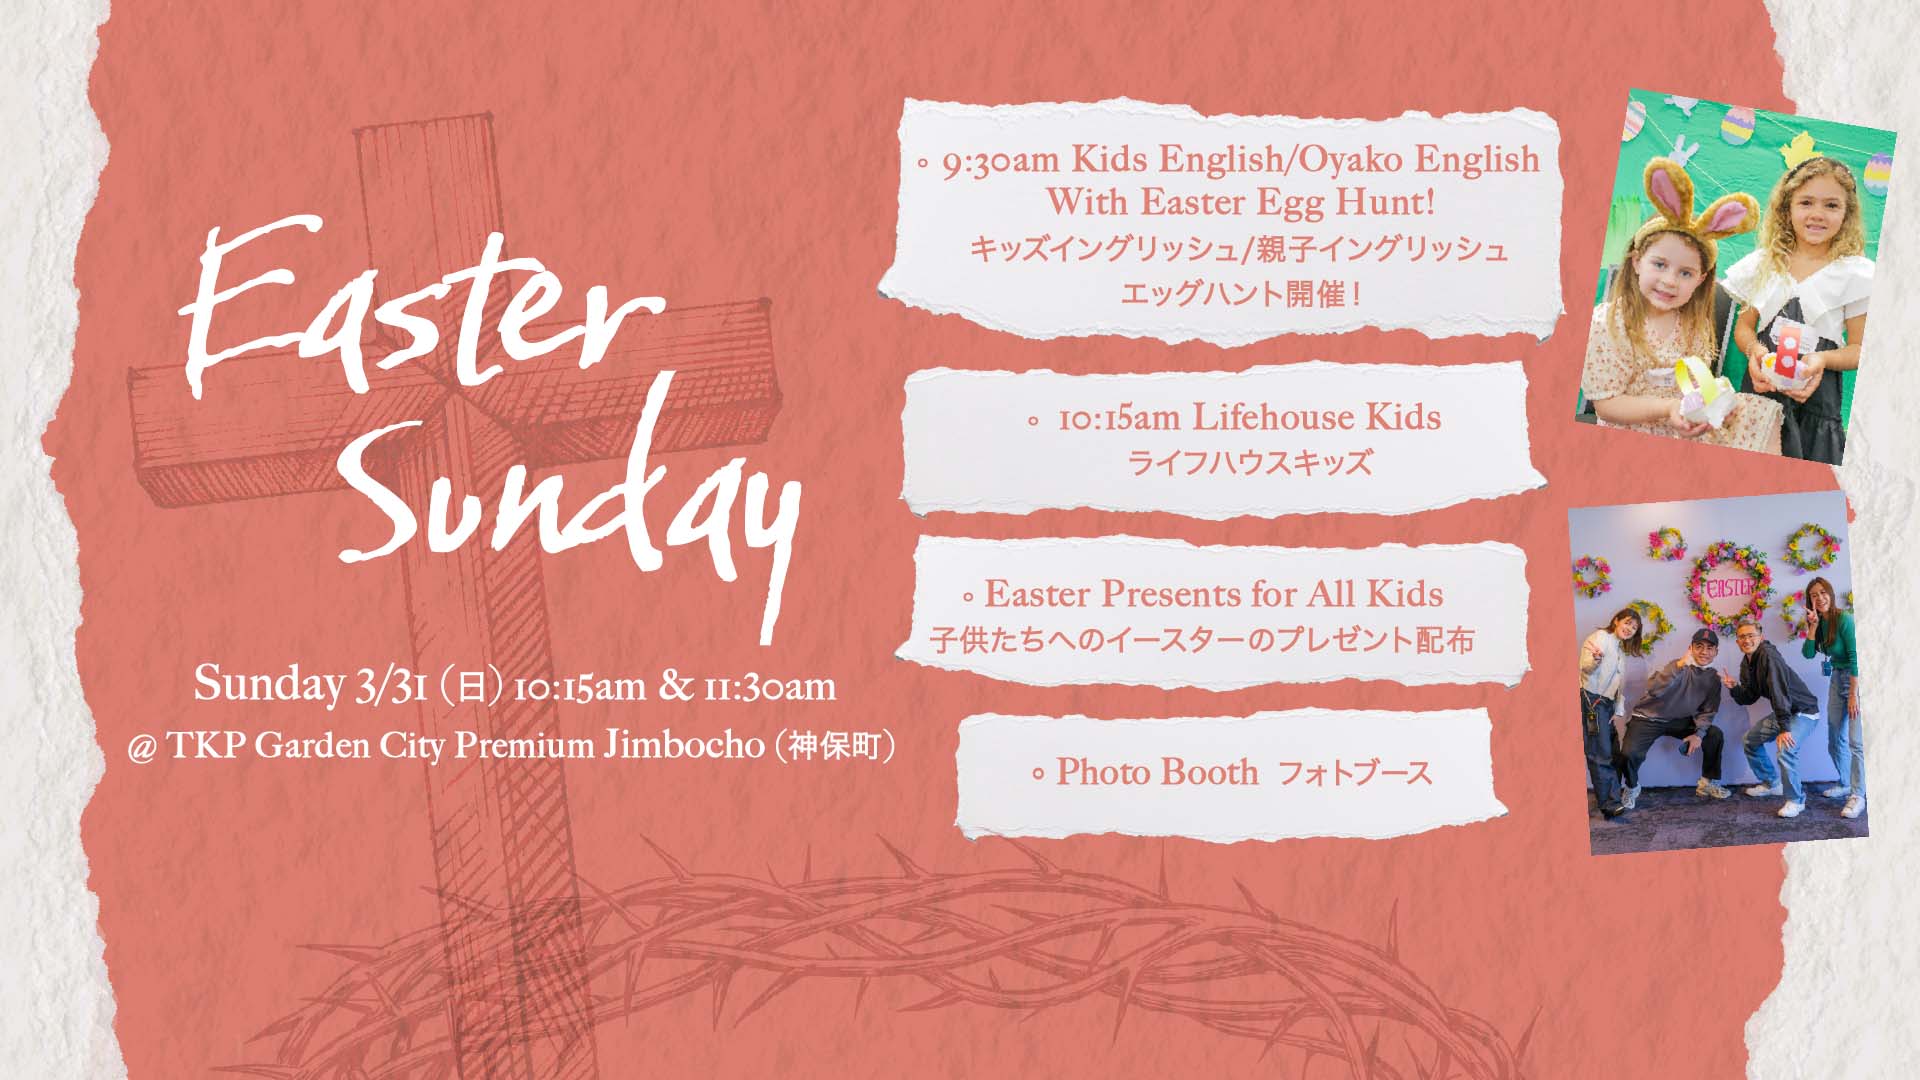 Easter Sunday Church Services in Tokyo